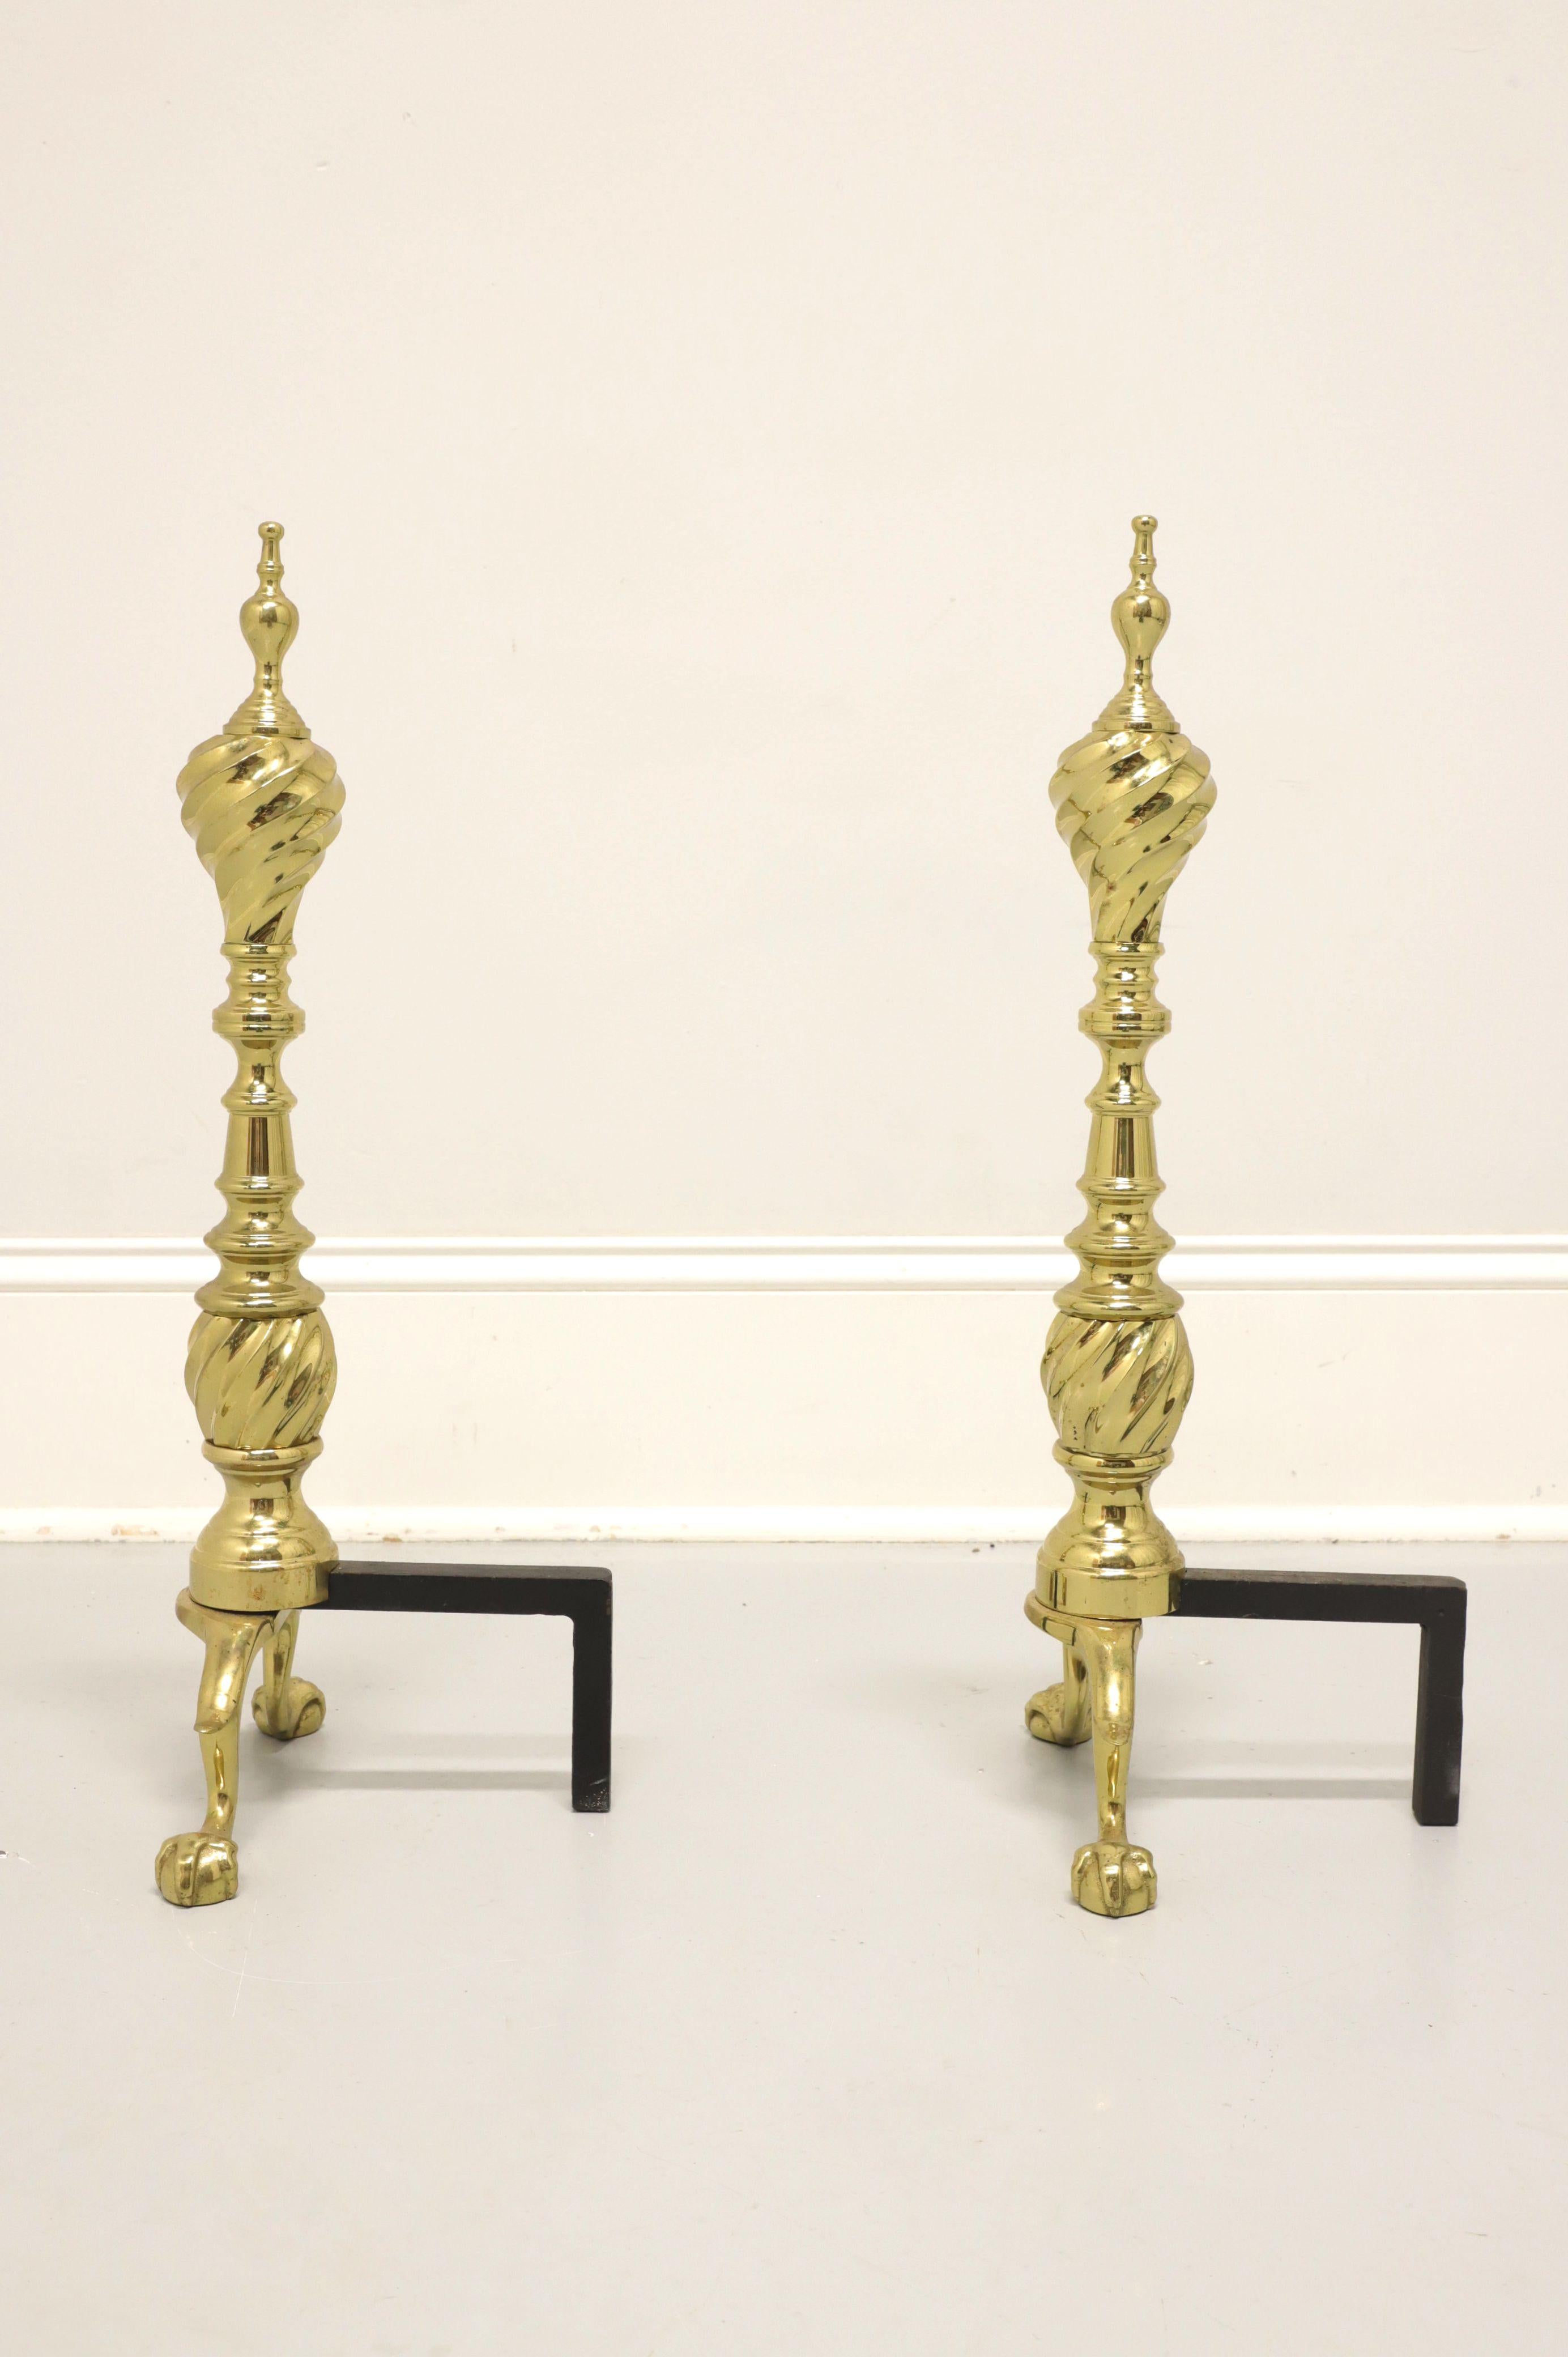 American VIRGINIA METALCRAFTERS Middleton House Brass & Metal Fireplace Andirons, B For Sale